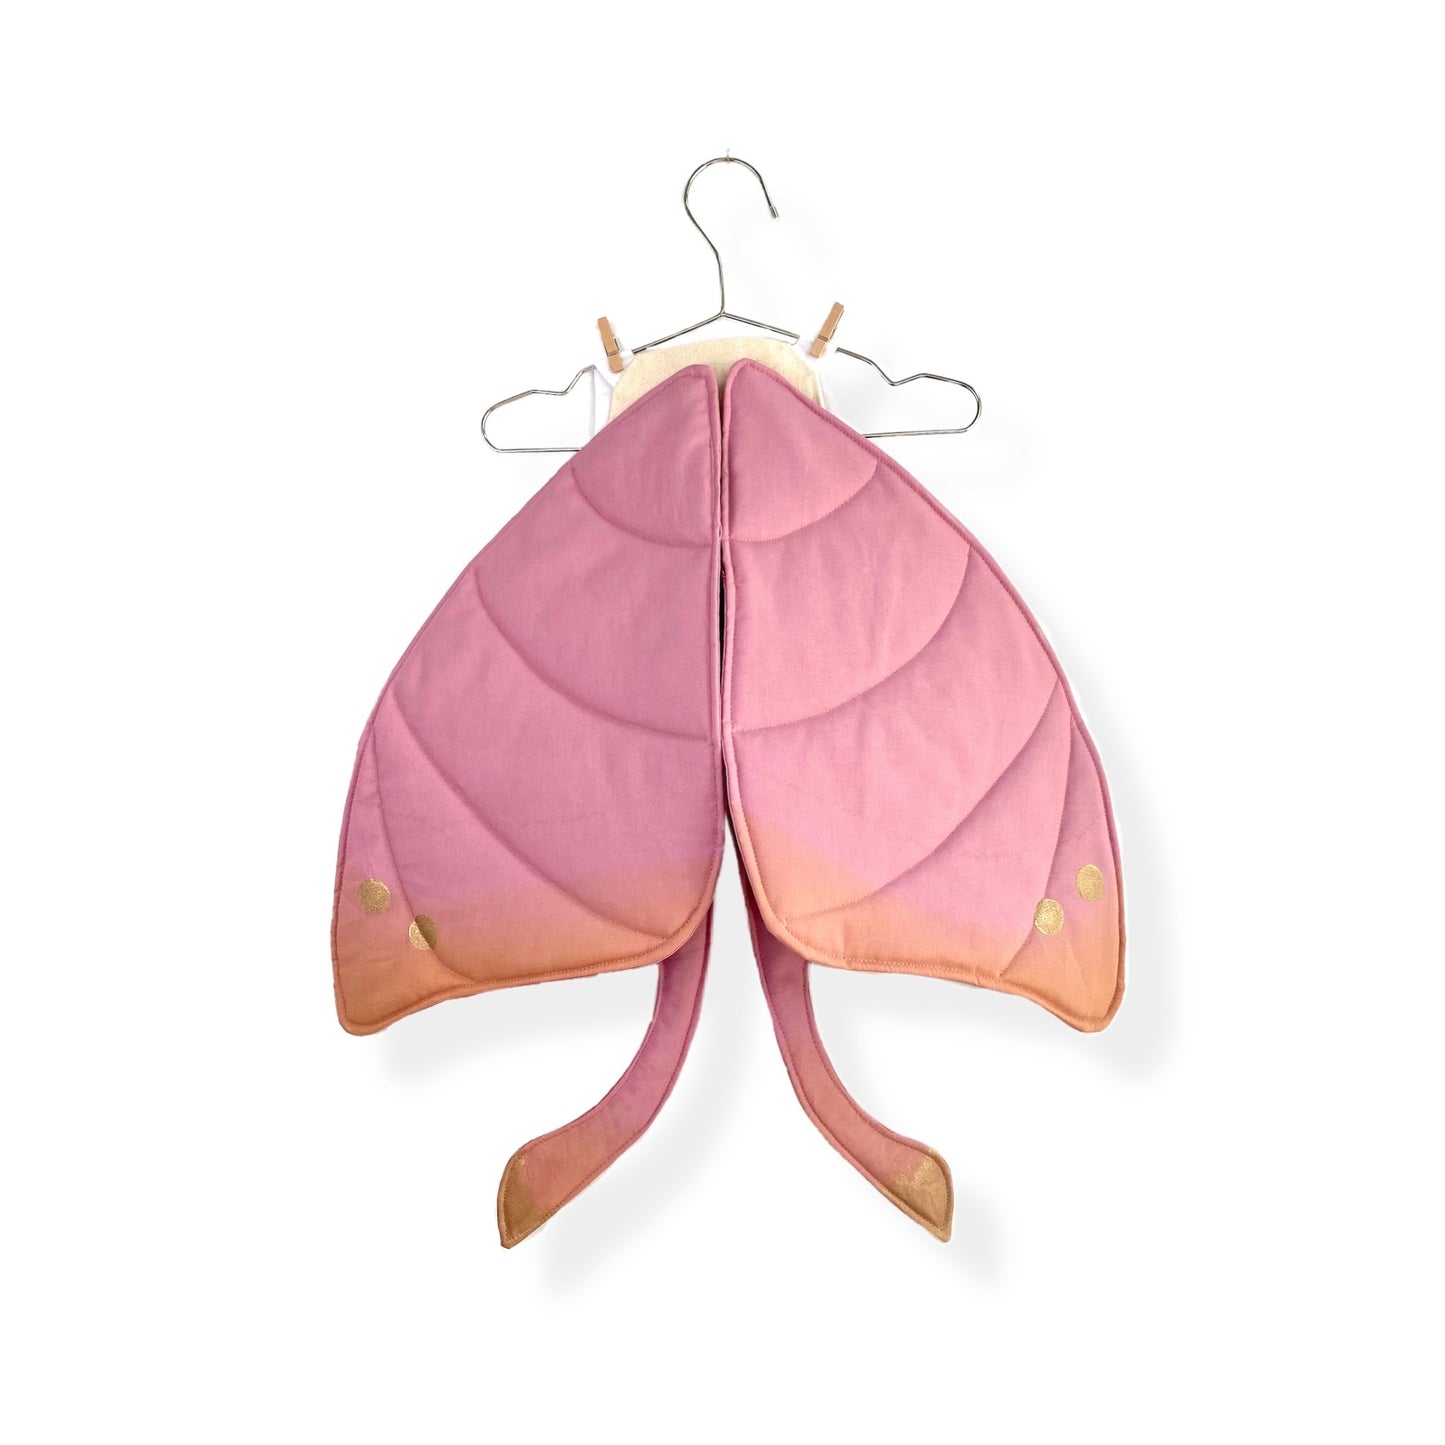 Pink silk moth costume wings for kids dress up play.